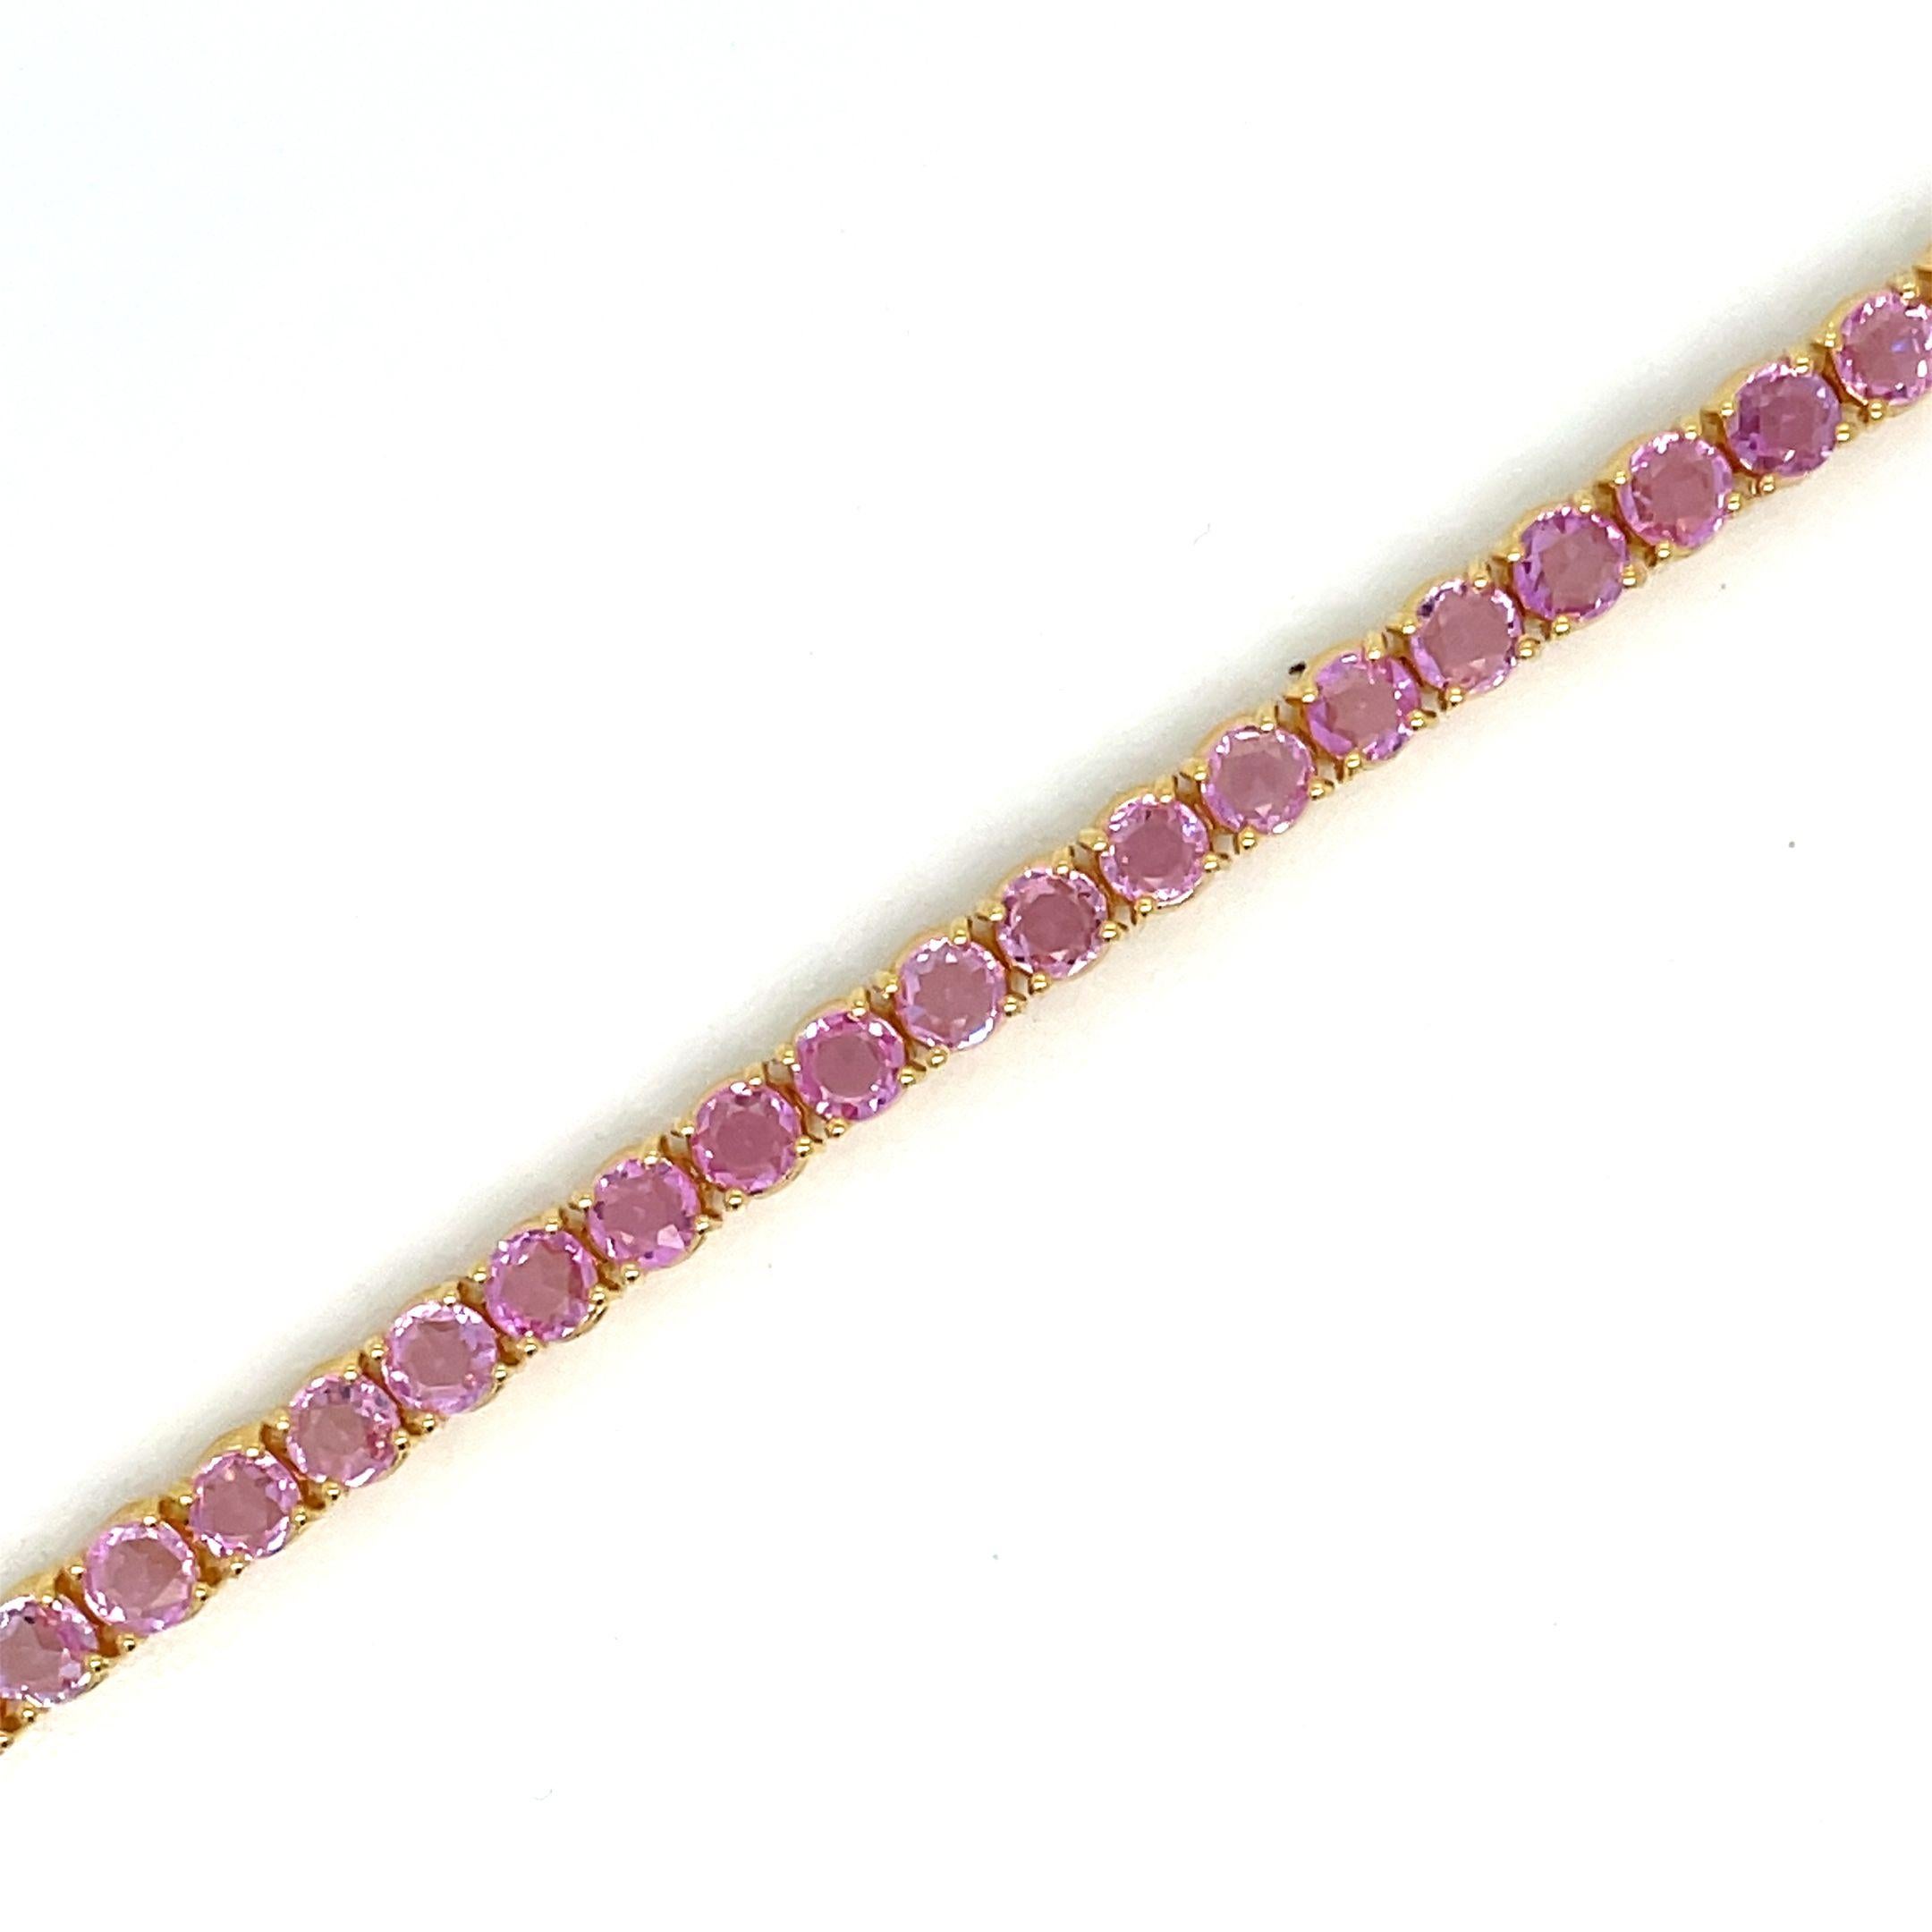 Fabulous important brand new bracelet made in solid 9 kt yellow gold and set with 9,60 Carats of vivid rose cut Natural Pink Sapphires, weighing 0.20 carat each (3,50 mm).
This piece is designed and crafted in our laboratories, thanks to old